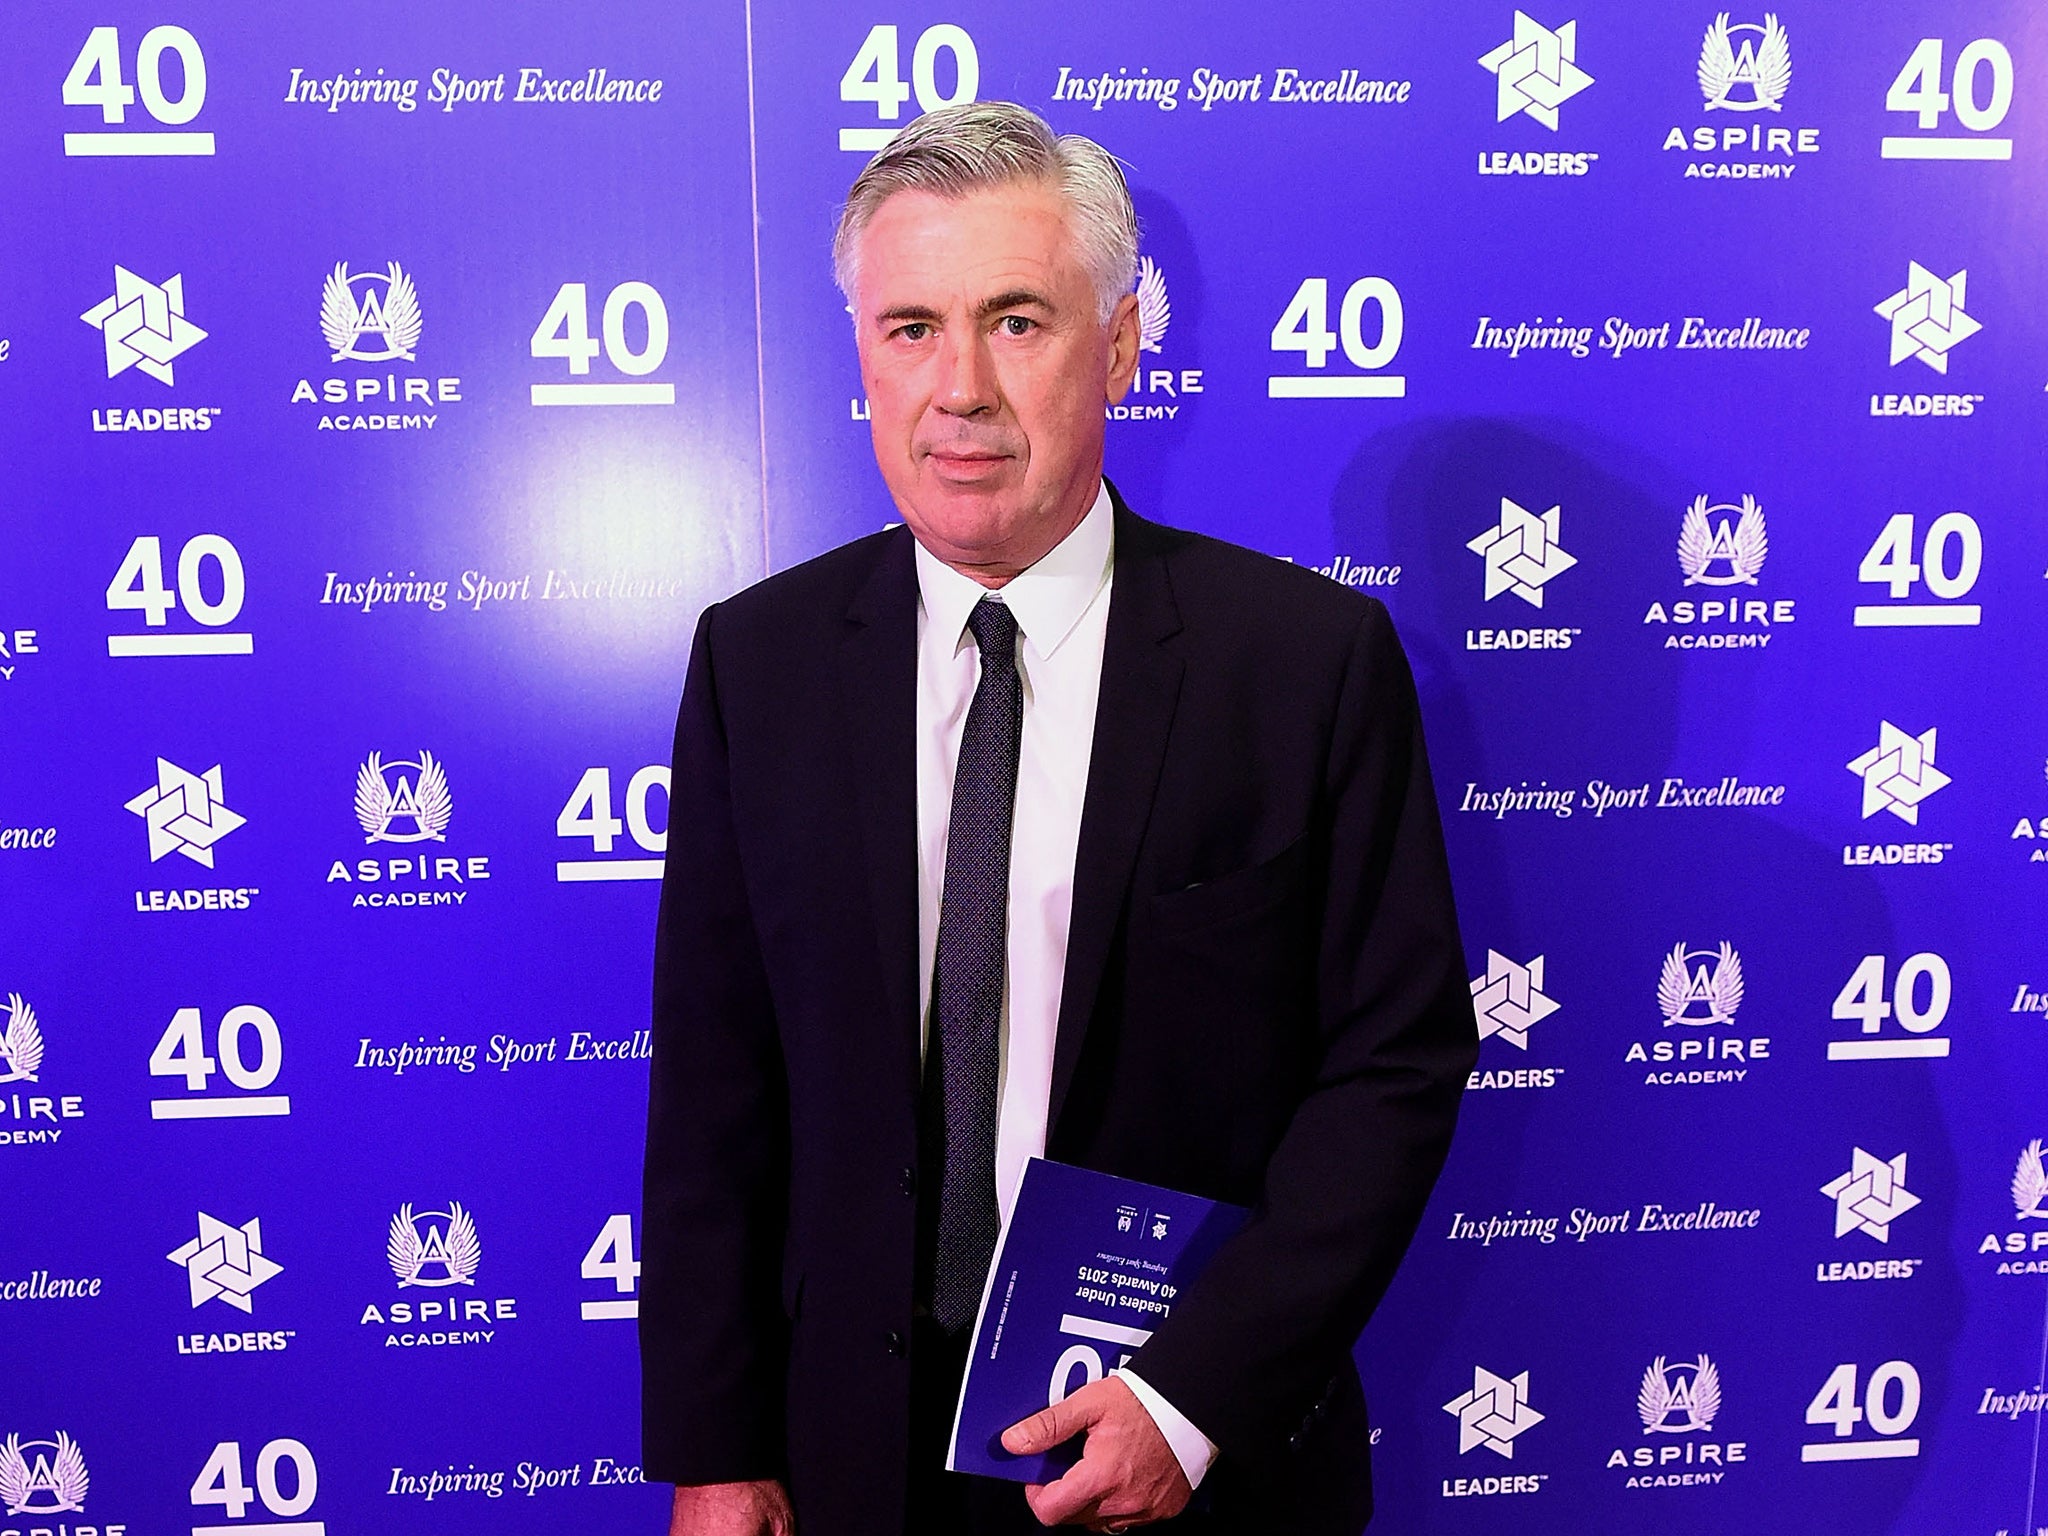 Former Real Madrid and Chelsea manager Carlo Ancelotti